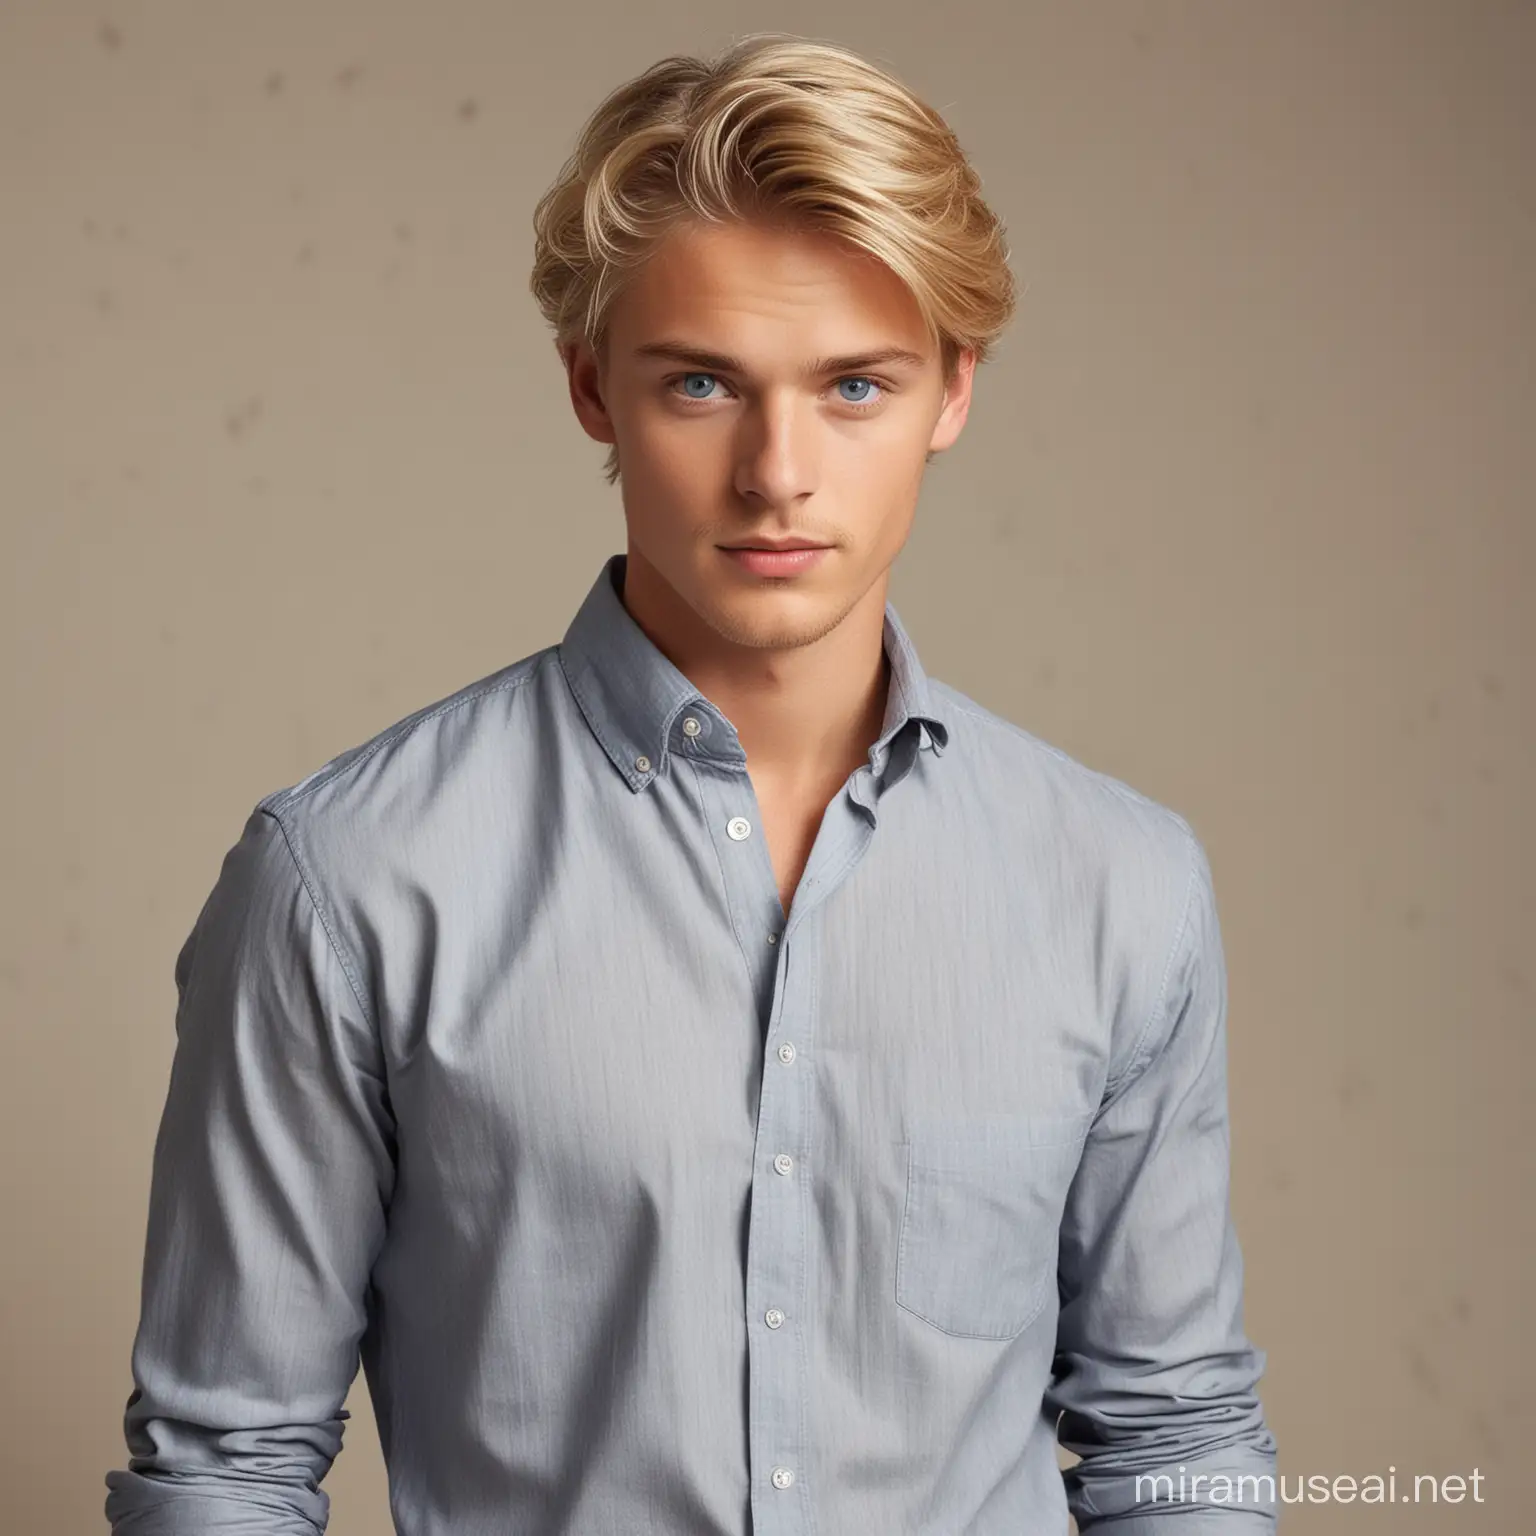 25 years old blond hair and blue eyes so handsome boy wearing a long sleeve shirt with a trouser.